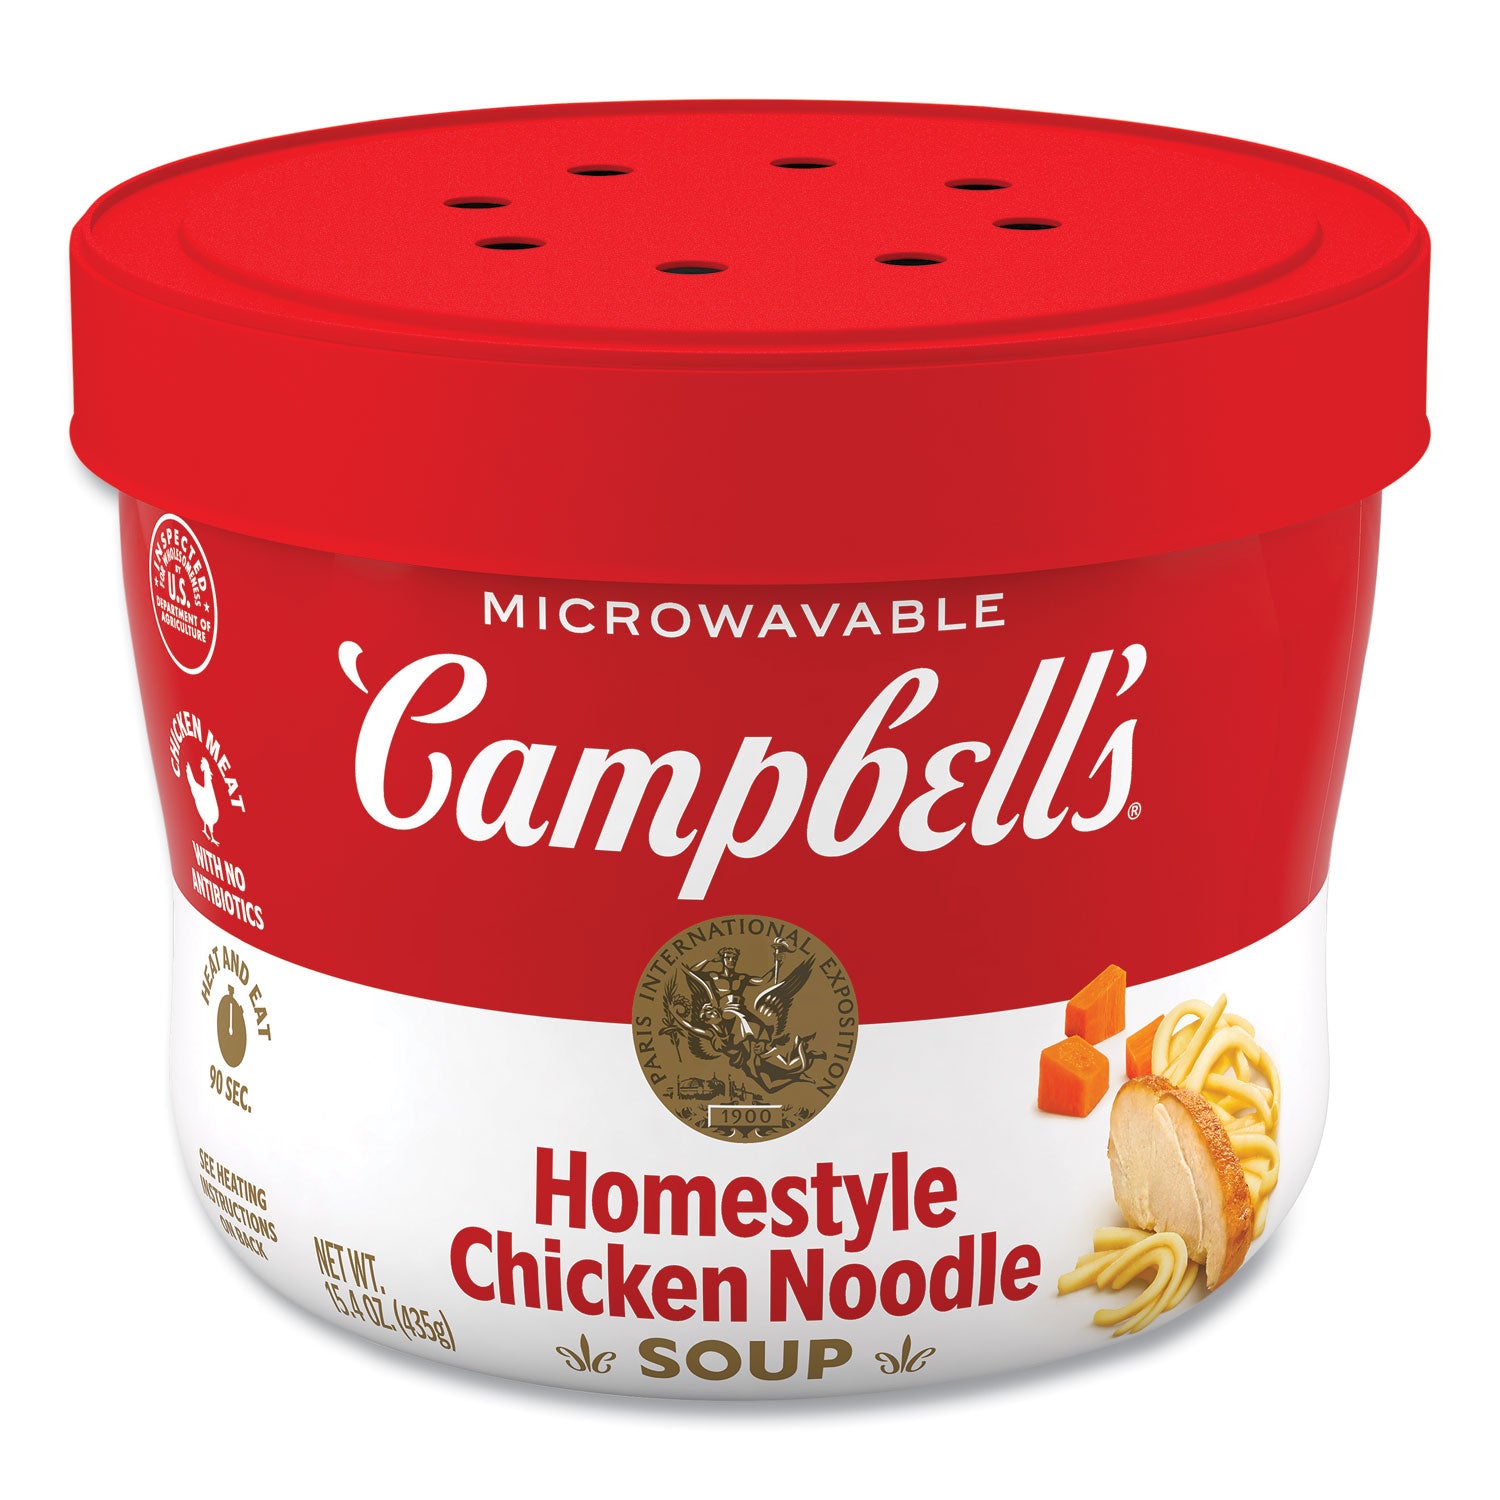 homestyle-chicken-noodle-bowl-154-oz-8-carton-ships-in-1-3-business-days_grr35100005 - 2